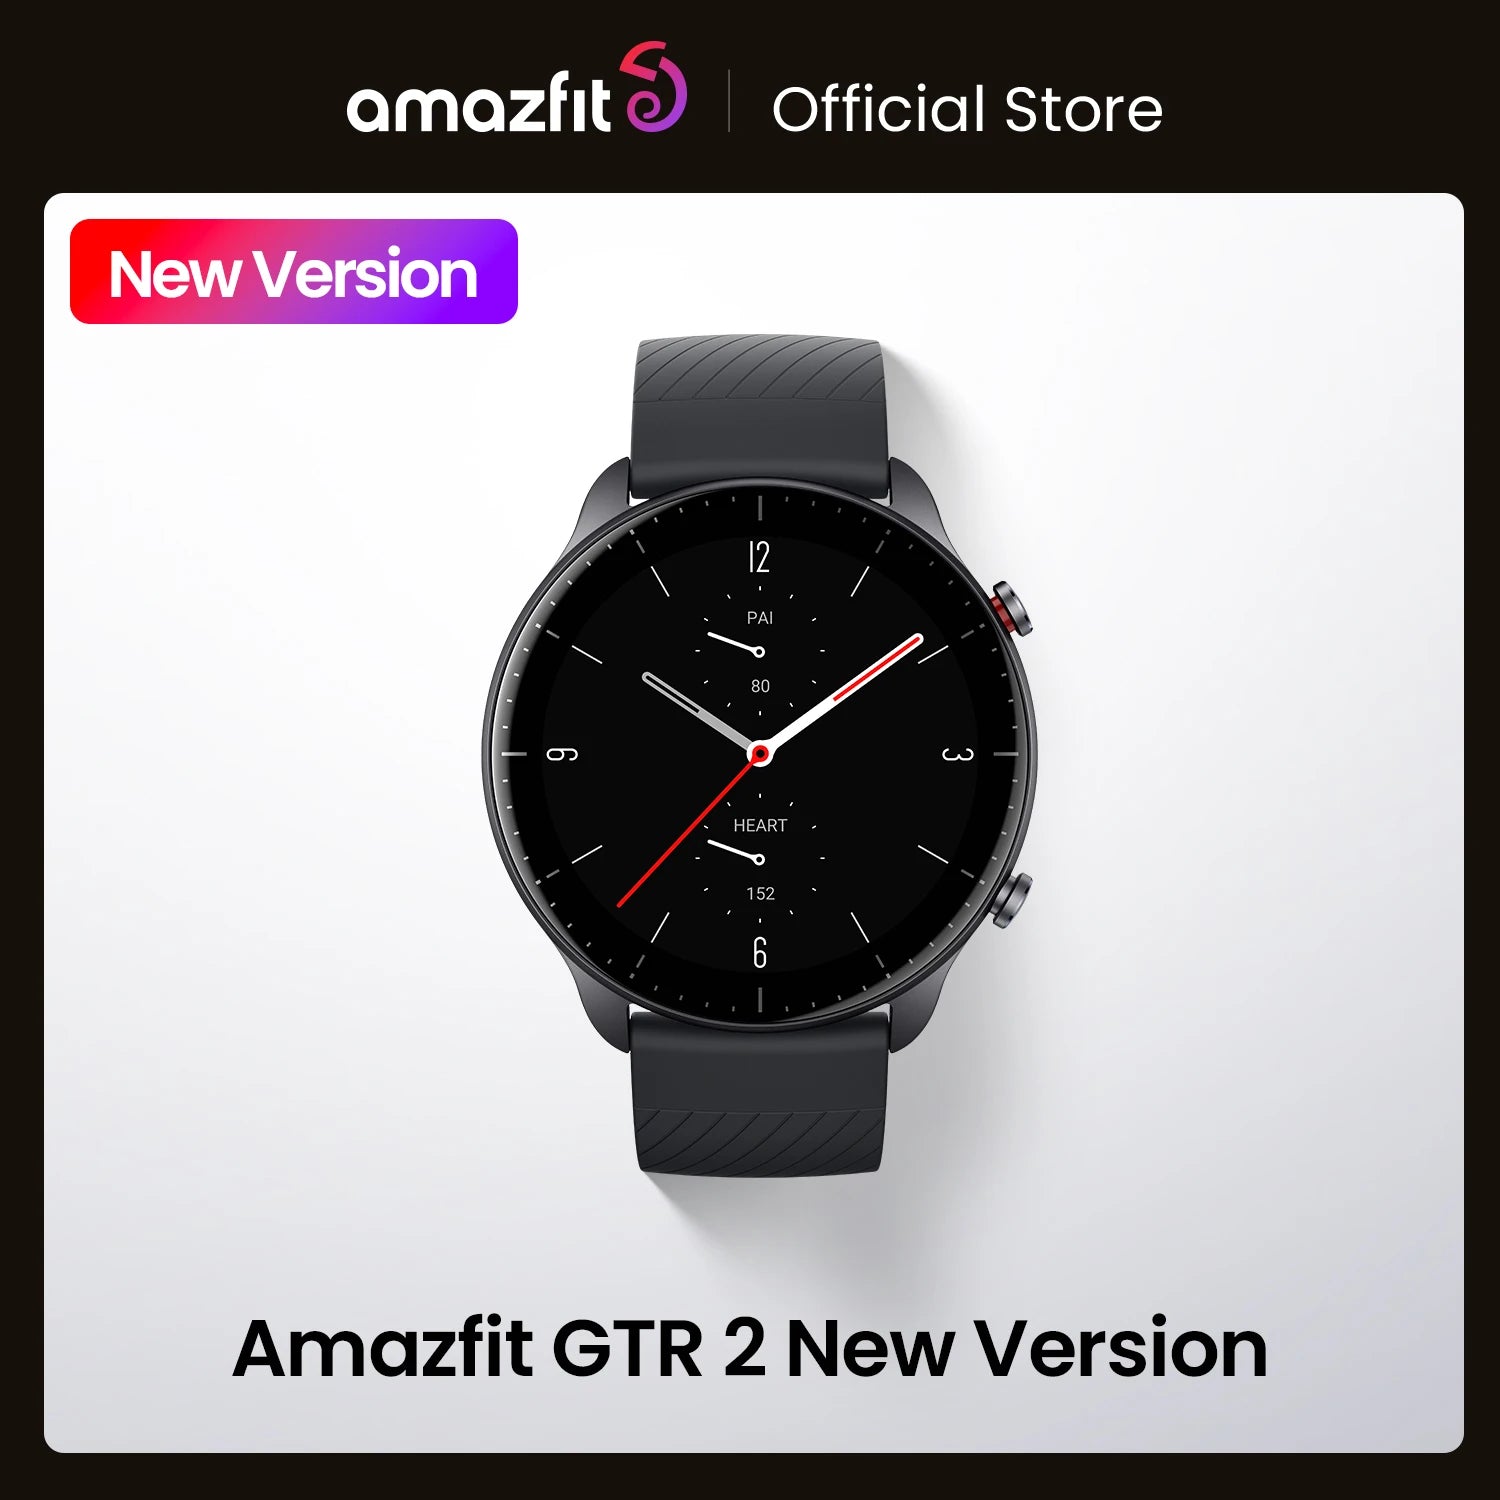 Amazfit GTR 2 New Version Smartwatch Alexa Built-in Ultra-long Battery Life Smart Watch For Android iOS Phone - Madeinsea©